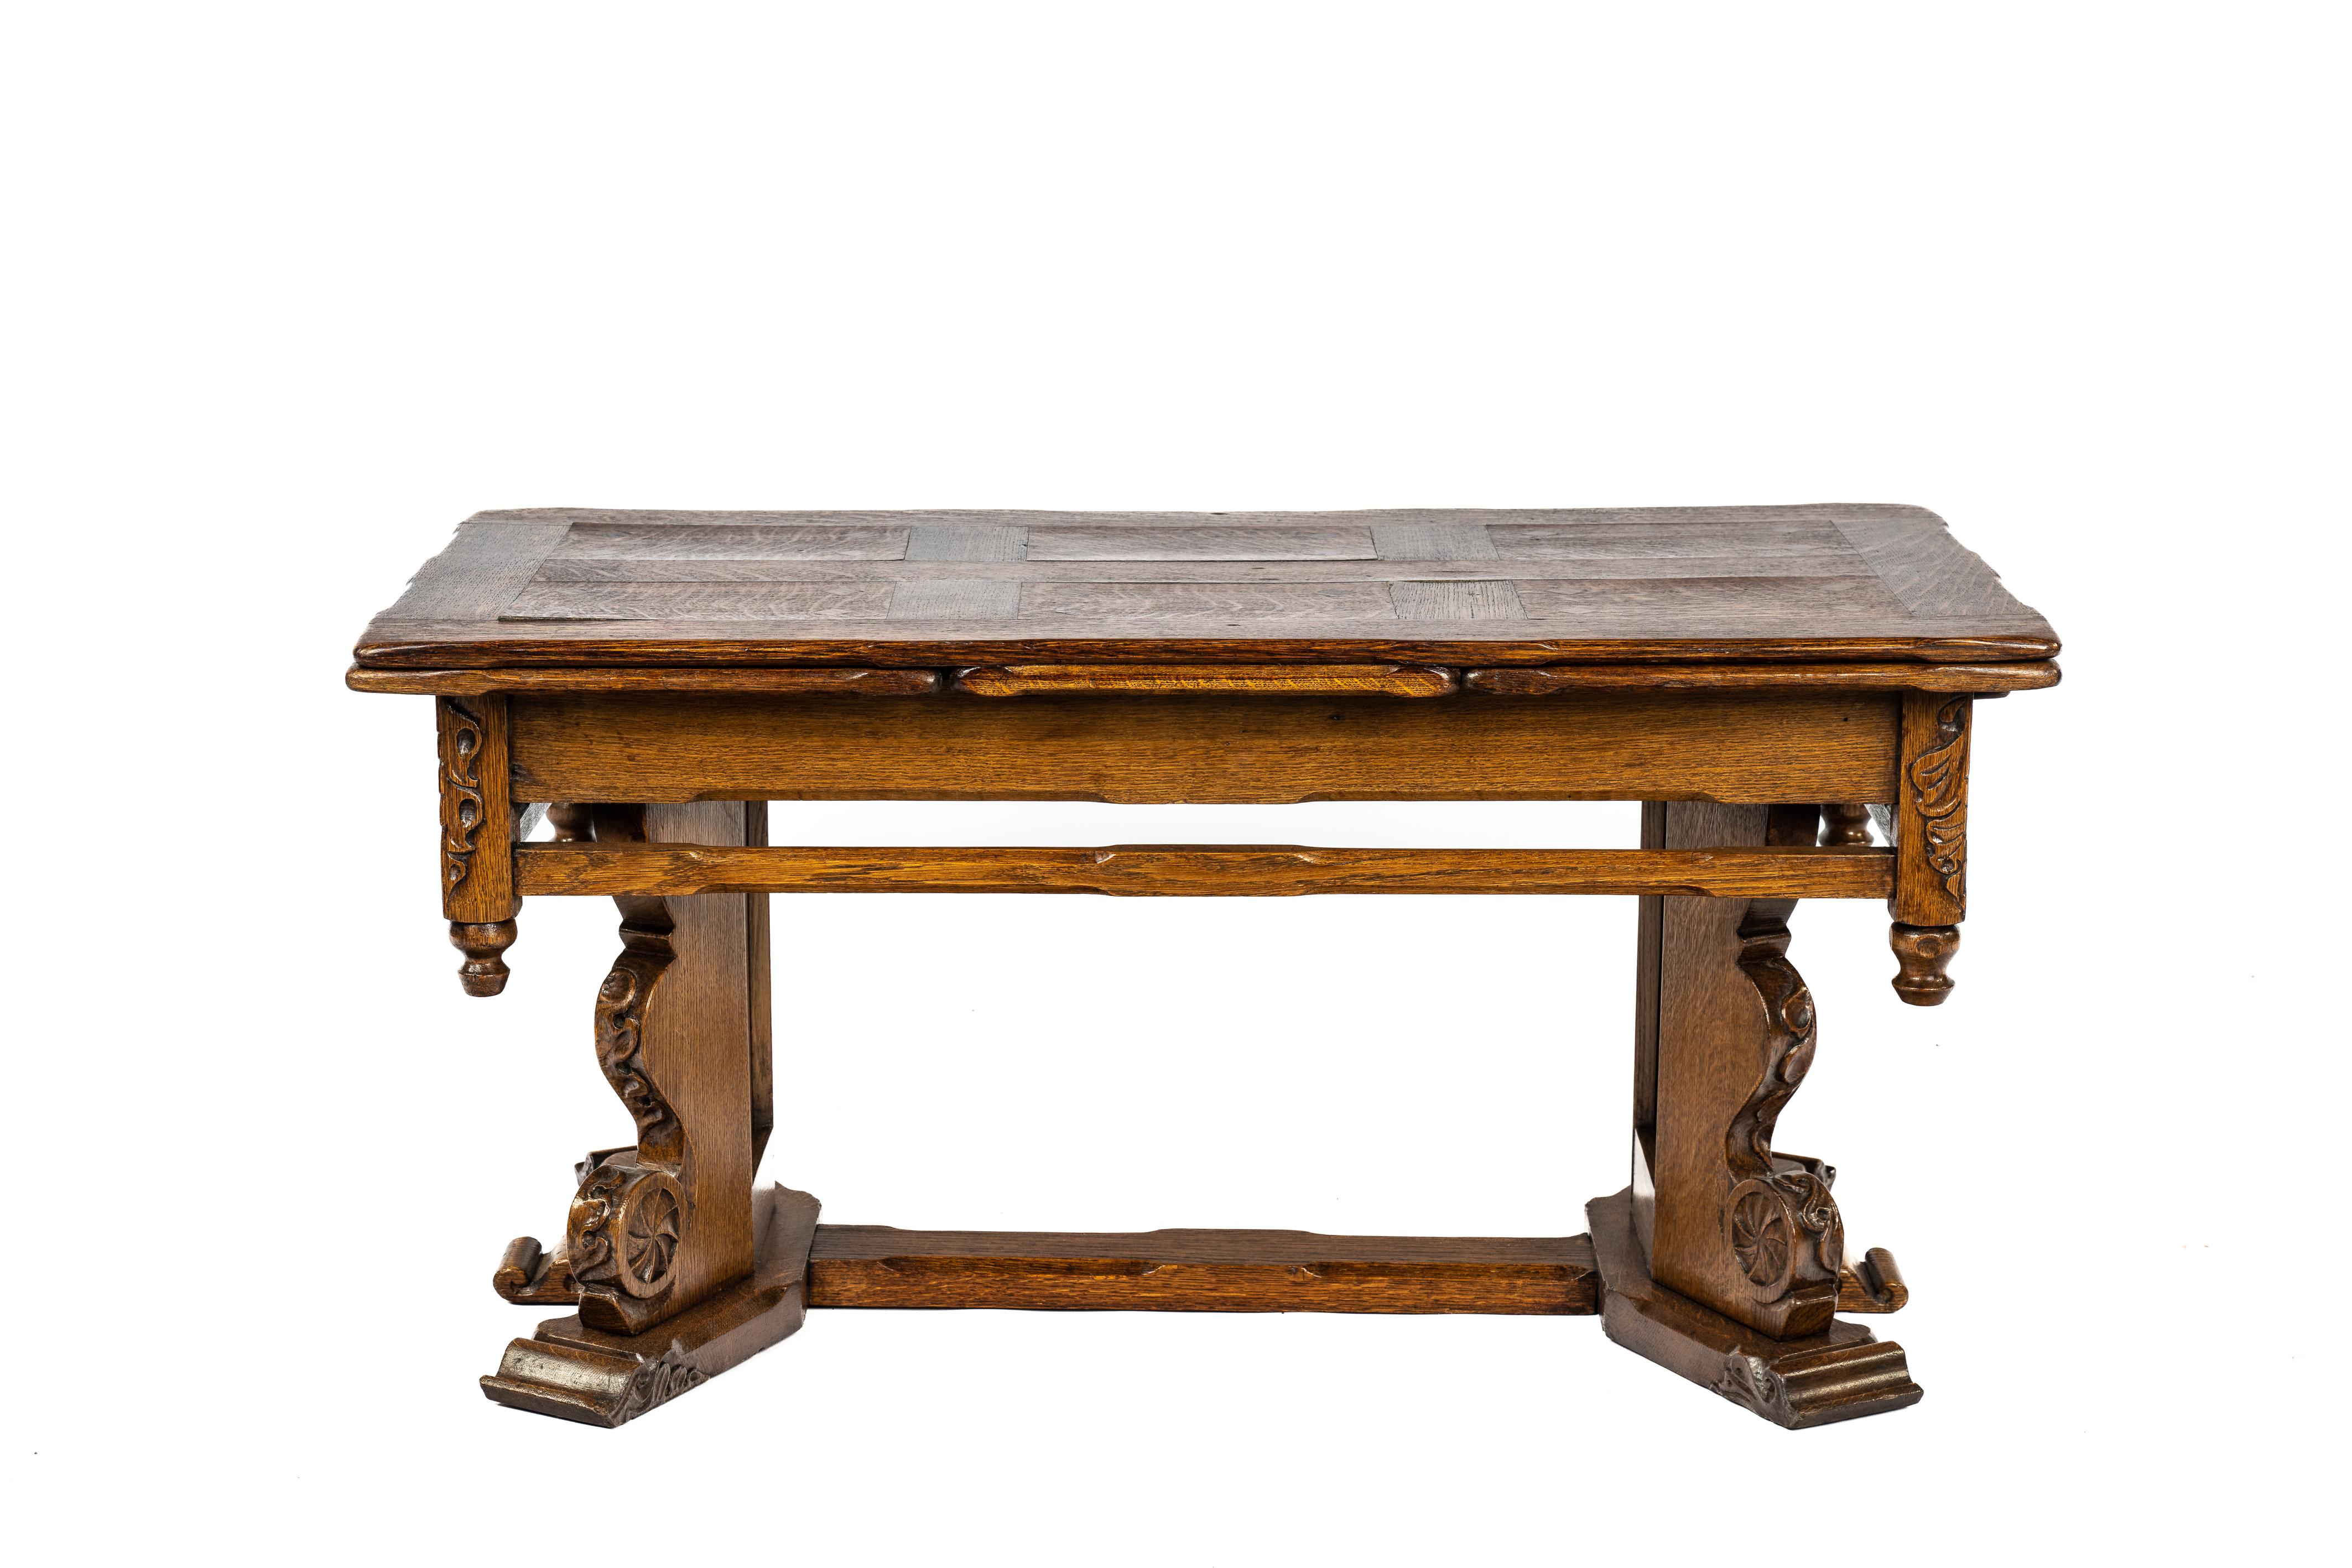 On offer here is a high-quality Vintage European Oak Coffee Table, a true testament to craftsmanship and elegance. This exceptional piece is meticulously constructed from the finest European summer oak displaying a great wood grain pattern and